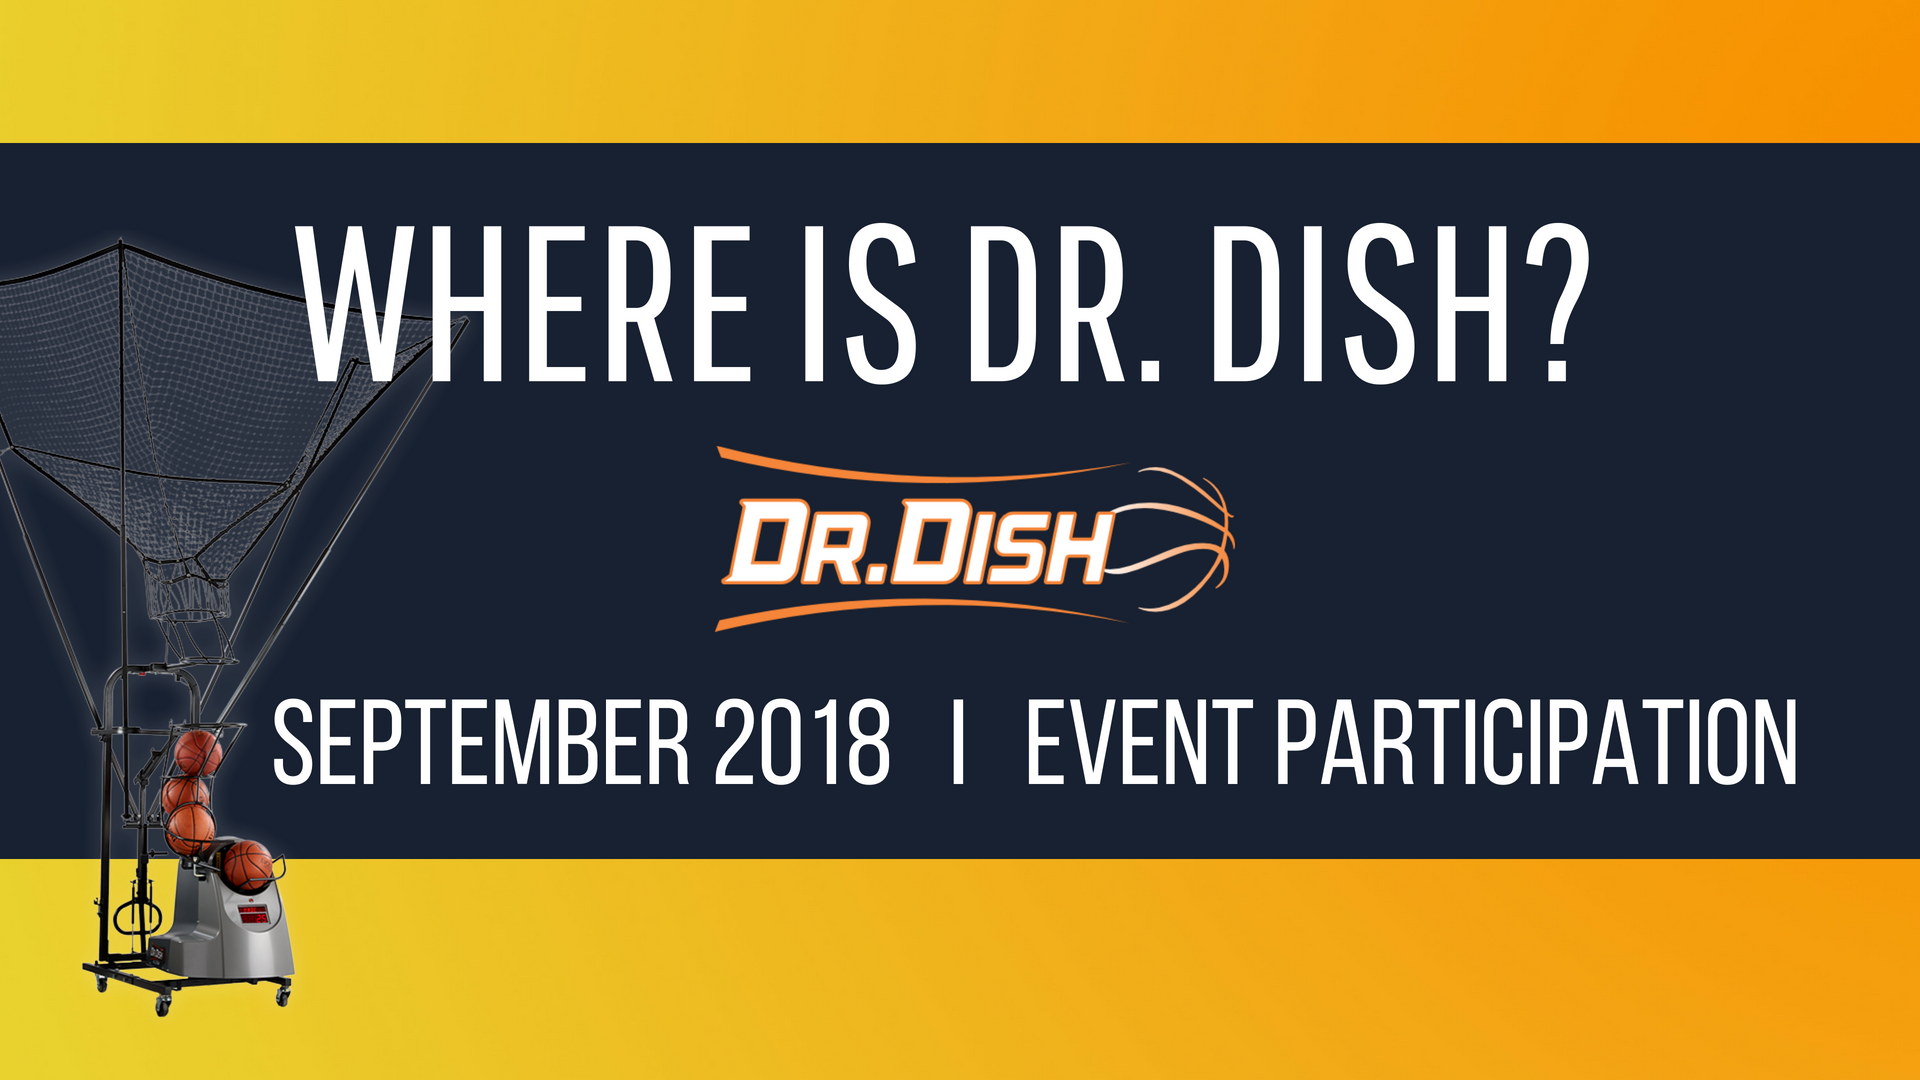 Where is Dr. dish_September 2018event participation (1)